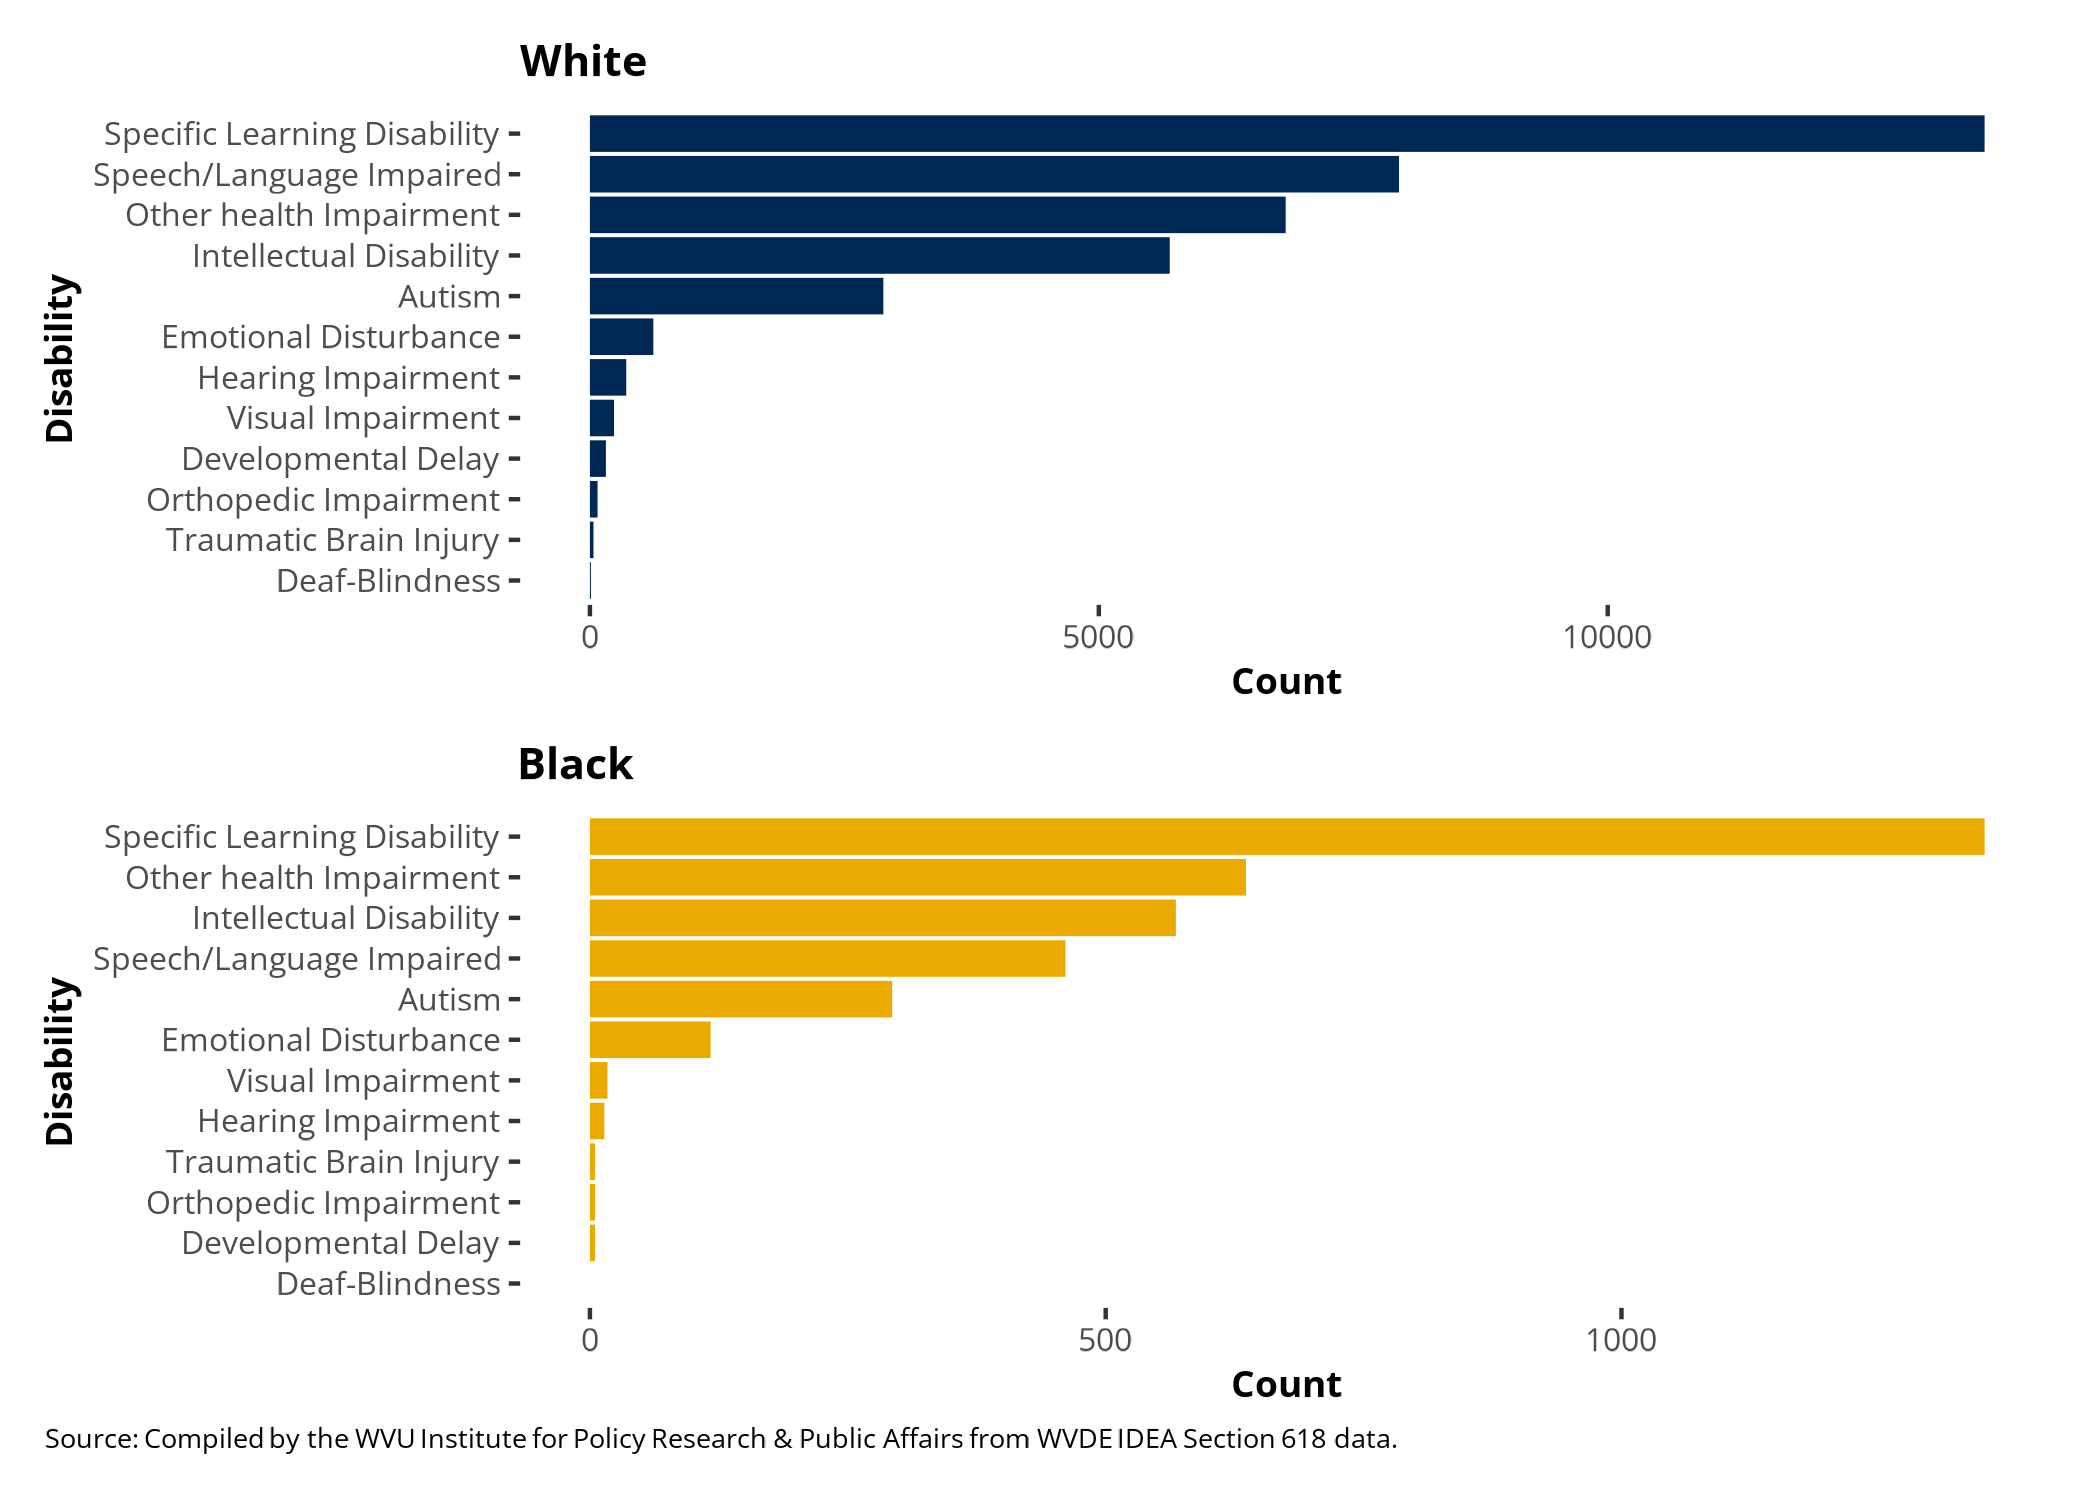 Figure 5: Bar graphs for counts of disability categories by race for white, black, latino, and asian students.